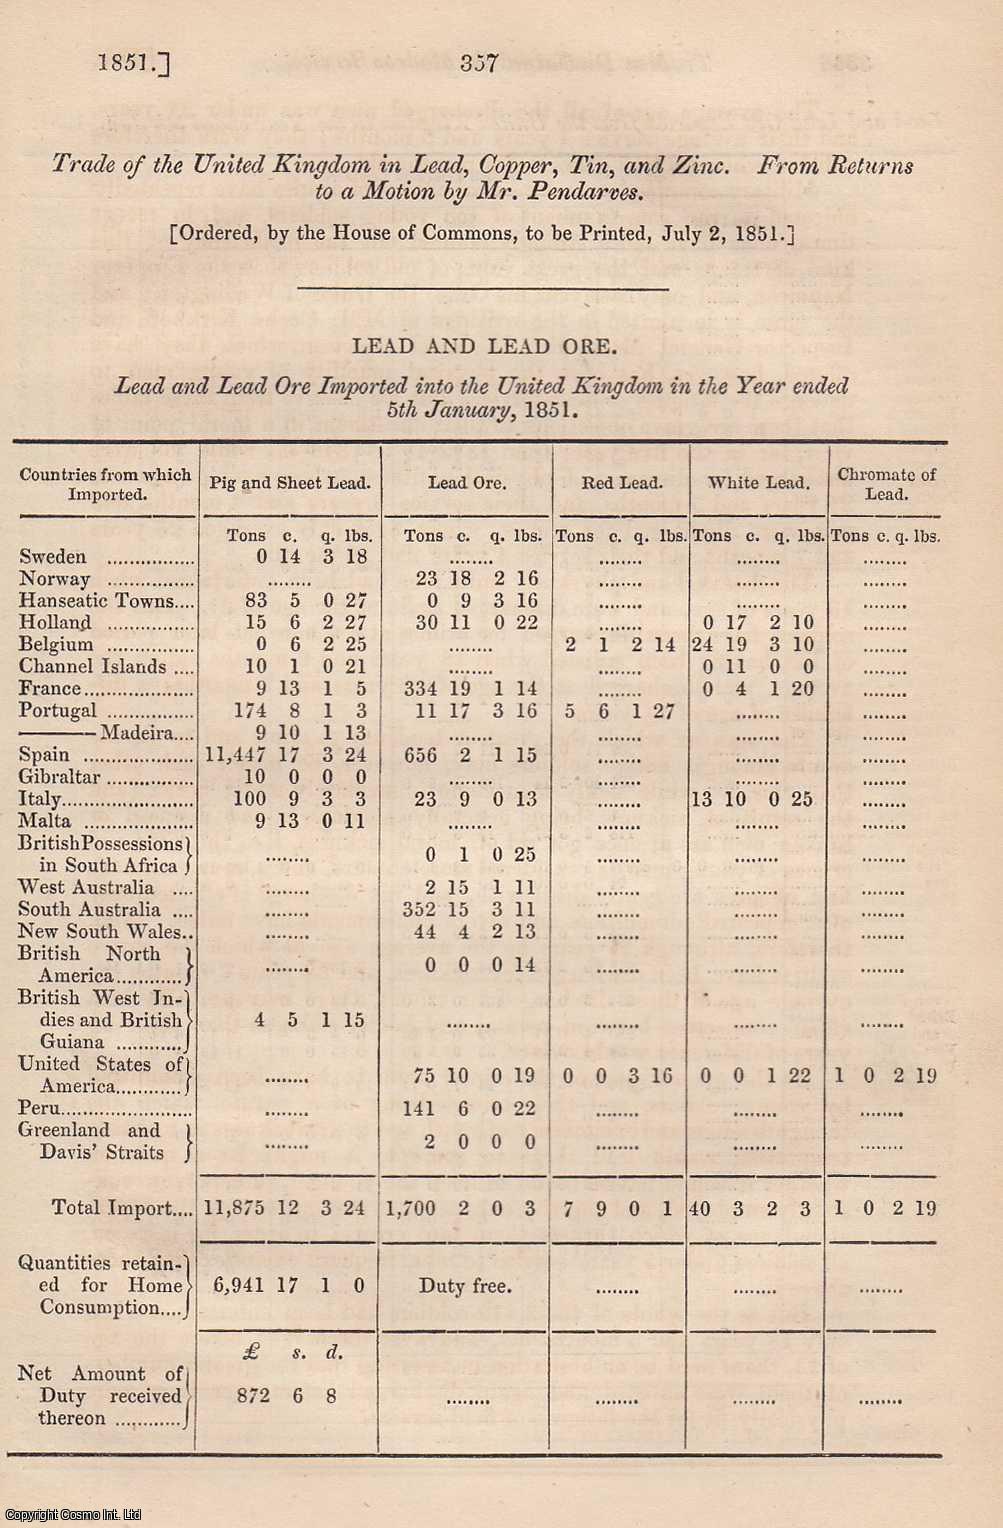 Statistical Society - Trade of the United Kingdom in Lead, Copper, Tin, and Zinc. A rare original article from the Journal of the Royal Statistical Society of London, 1851.